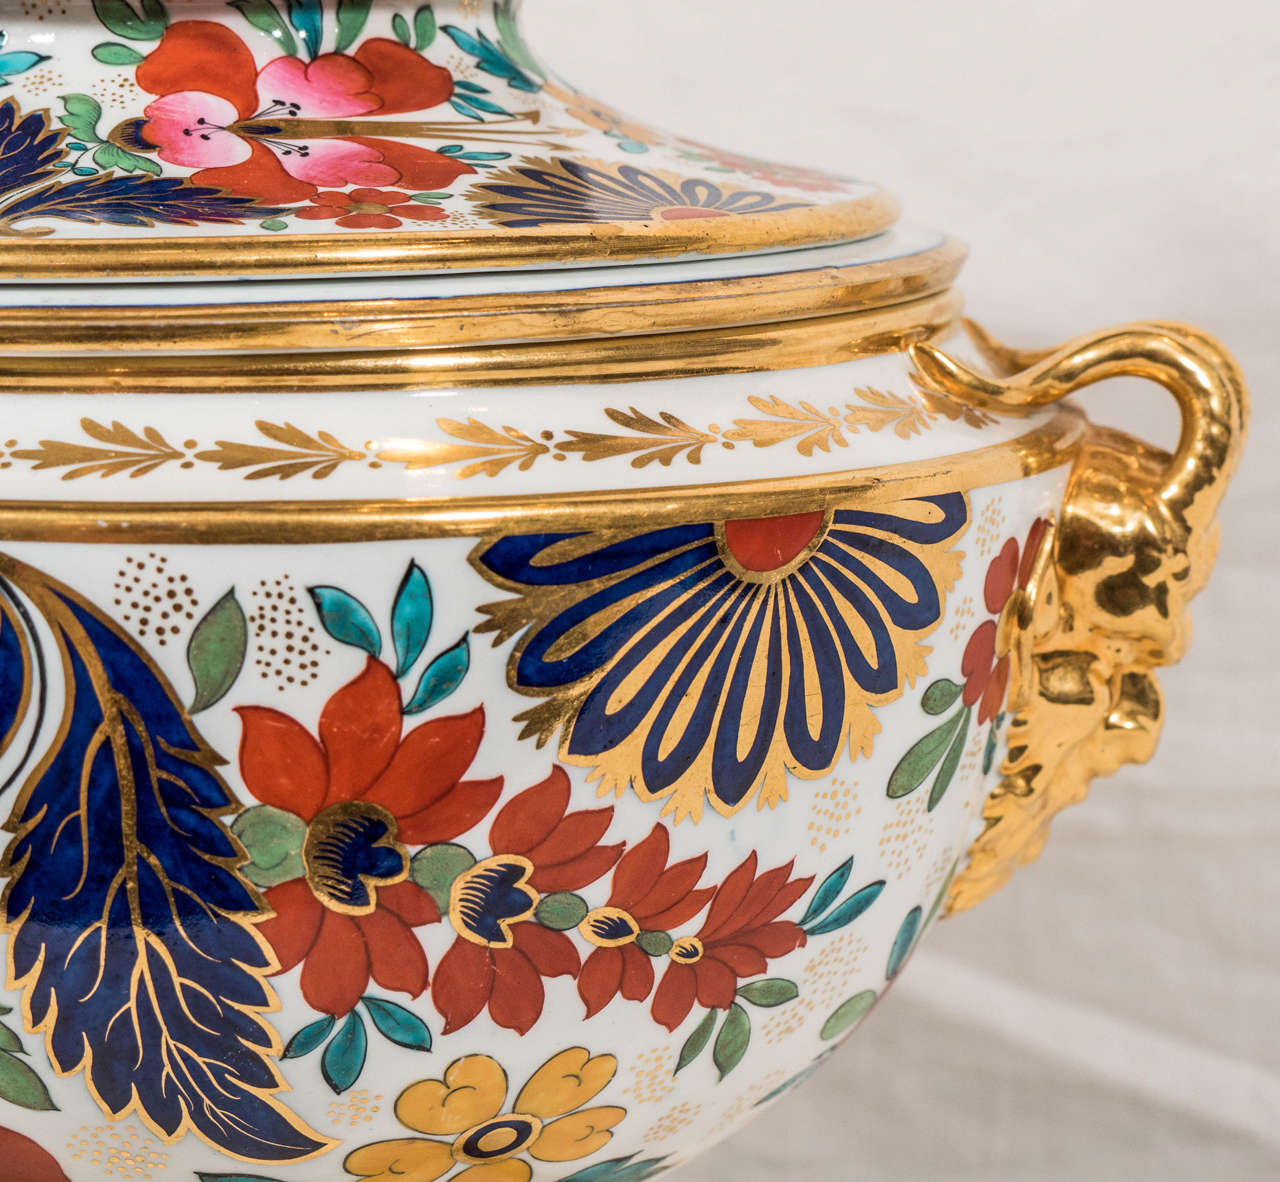 A Regency period ice pail painted in Imari colors with red flowers, blue, green, and turquoise leaves. The Barr Flight Barr Worcester factory made the finest porcelains of the Regency period and was known for its lavish gilding and the intense